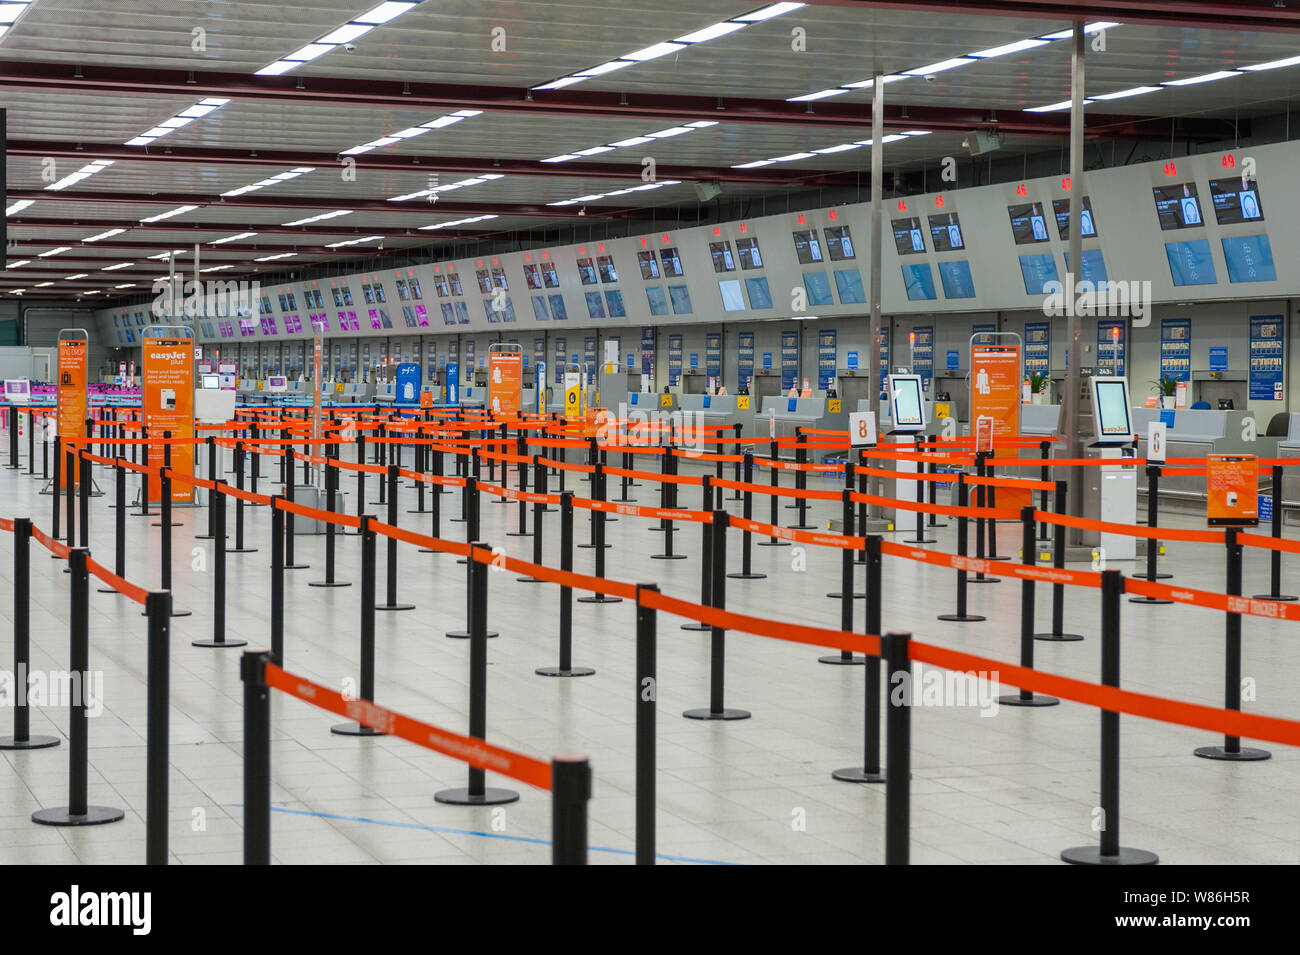 London Luton Airport check-in area Stock Photo